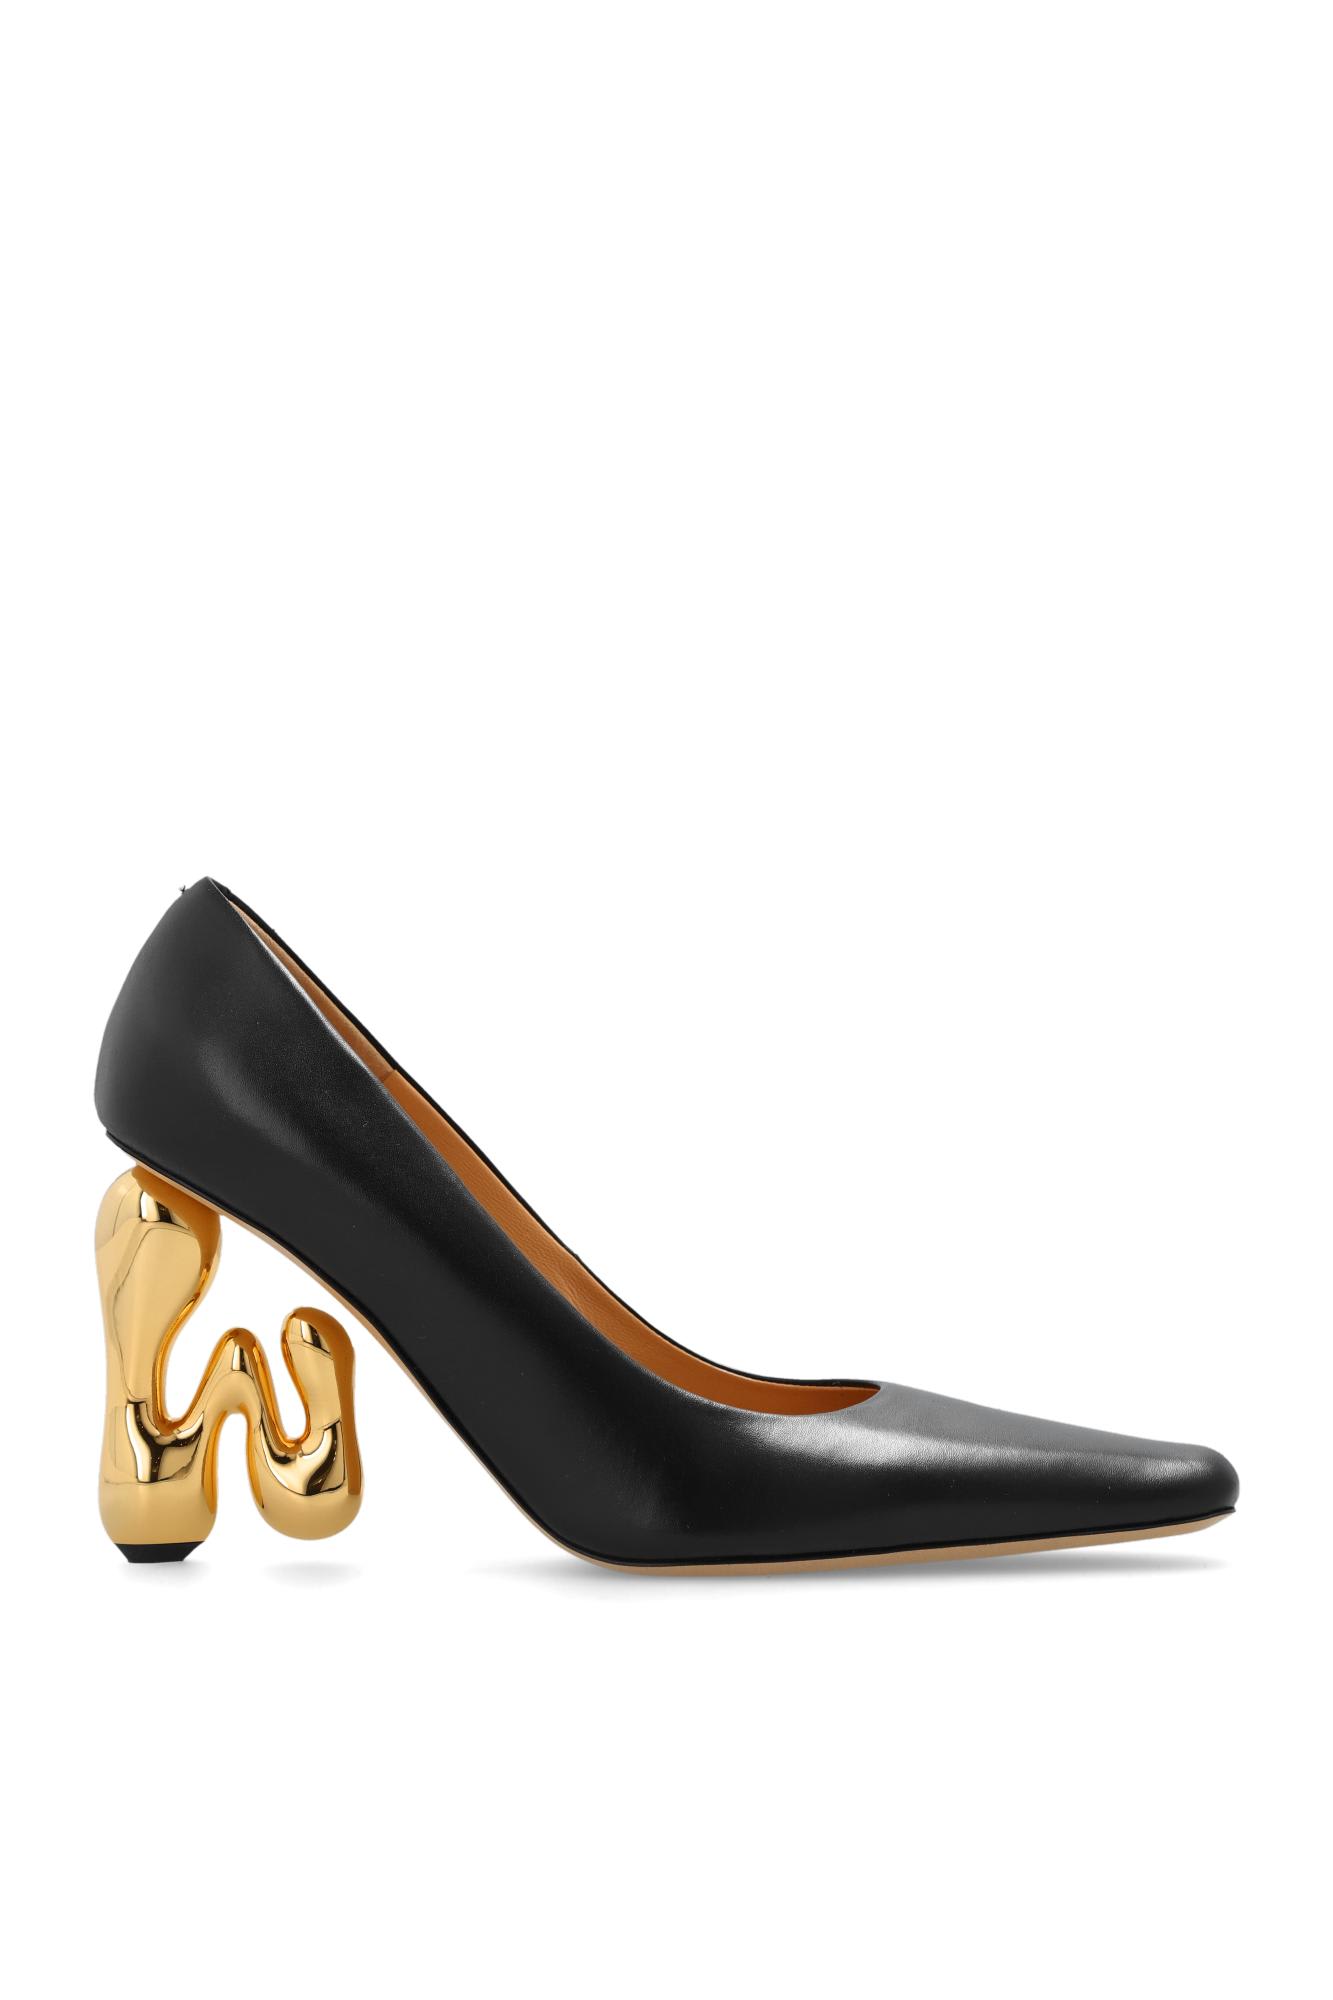 JW ANDERSON PUMPS WITH LOGO